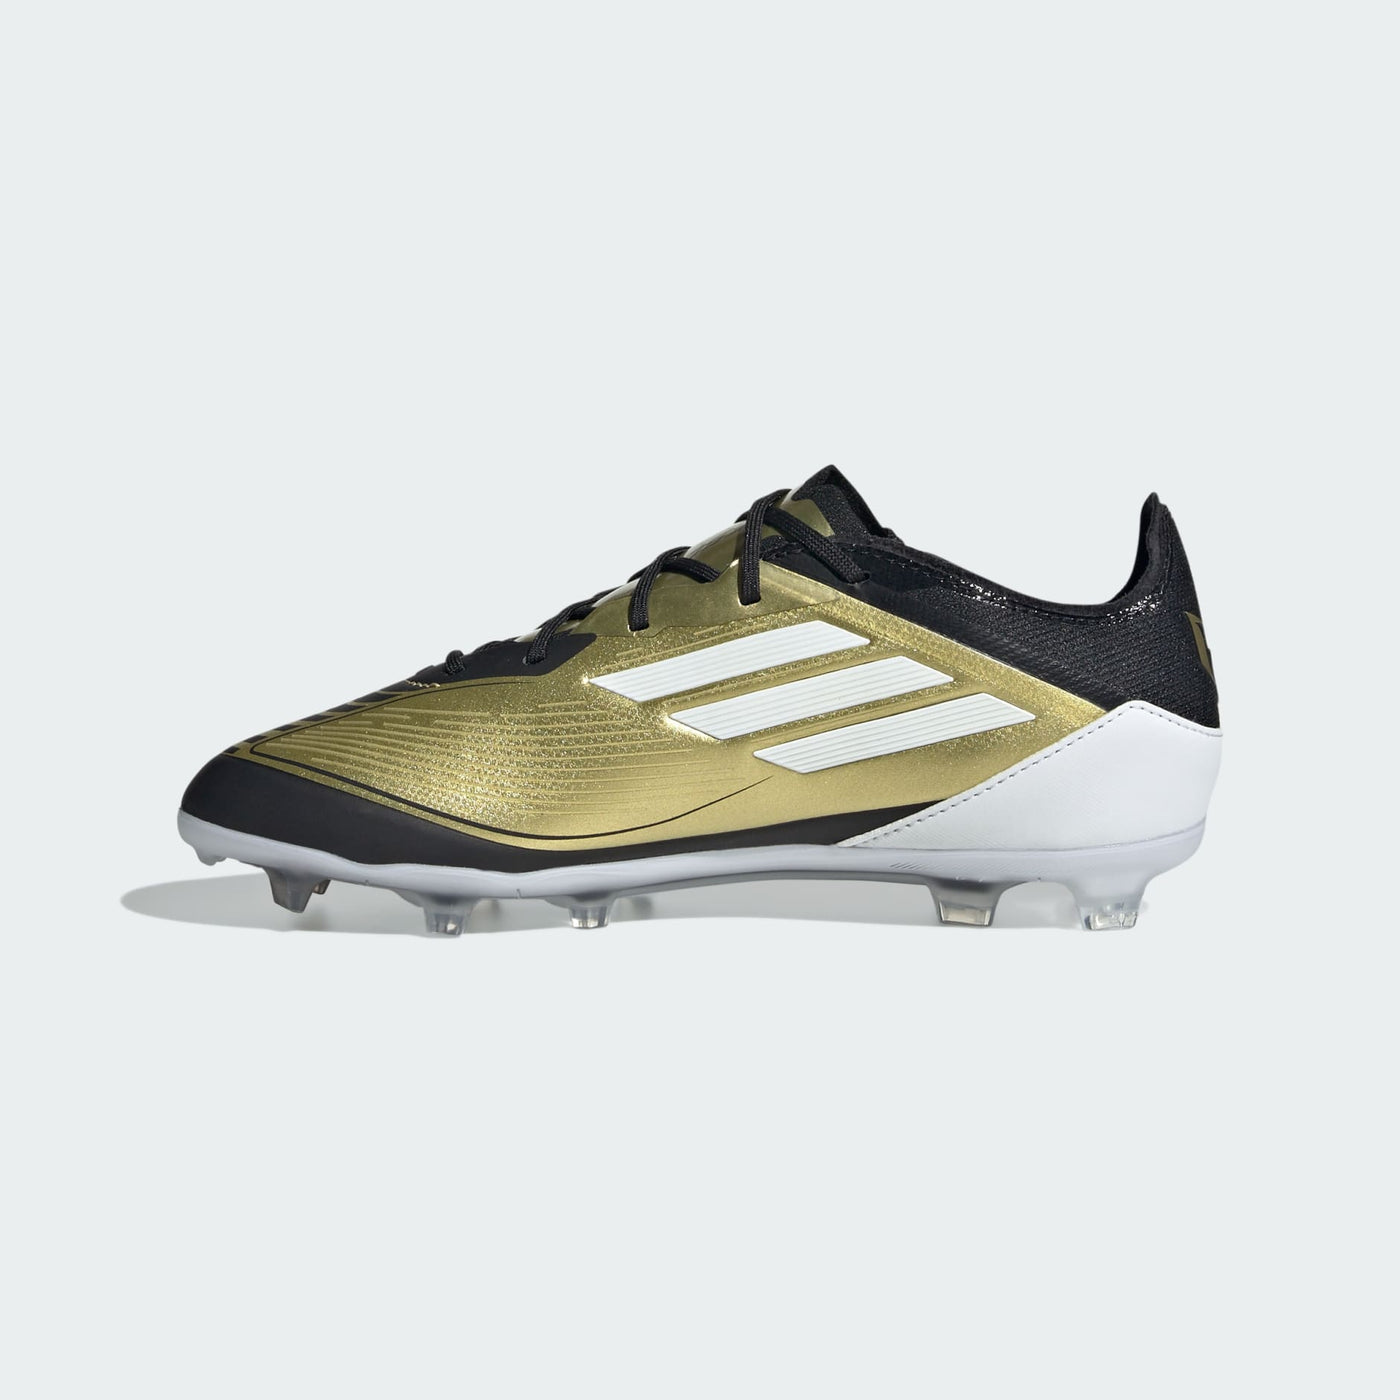 F50 PRO MESSI FIRM GROUND BOOTS KIDS